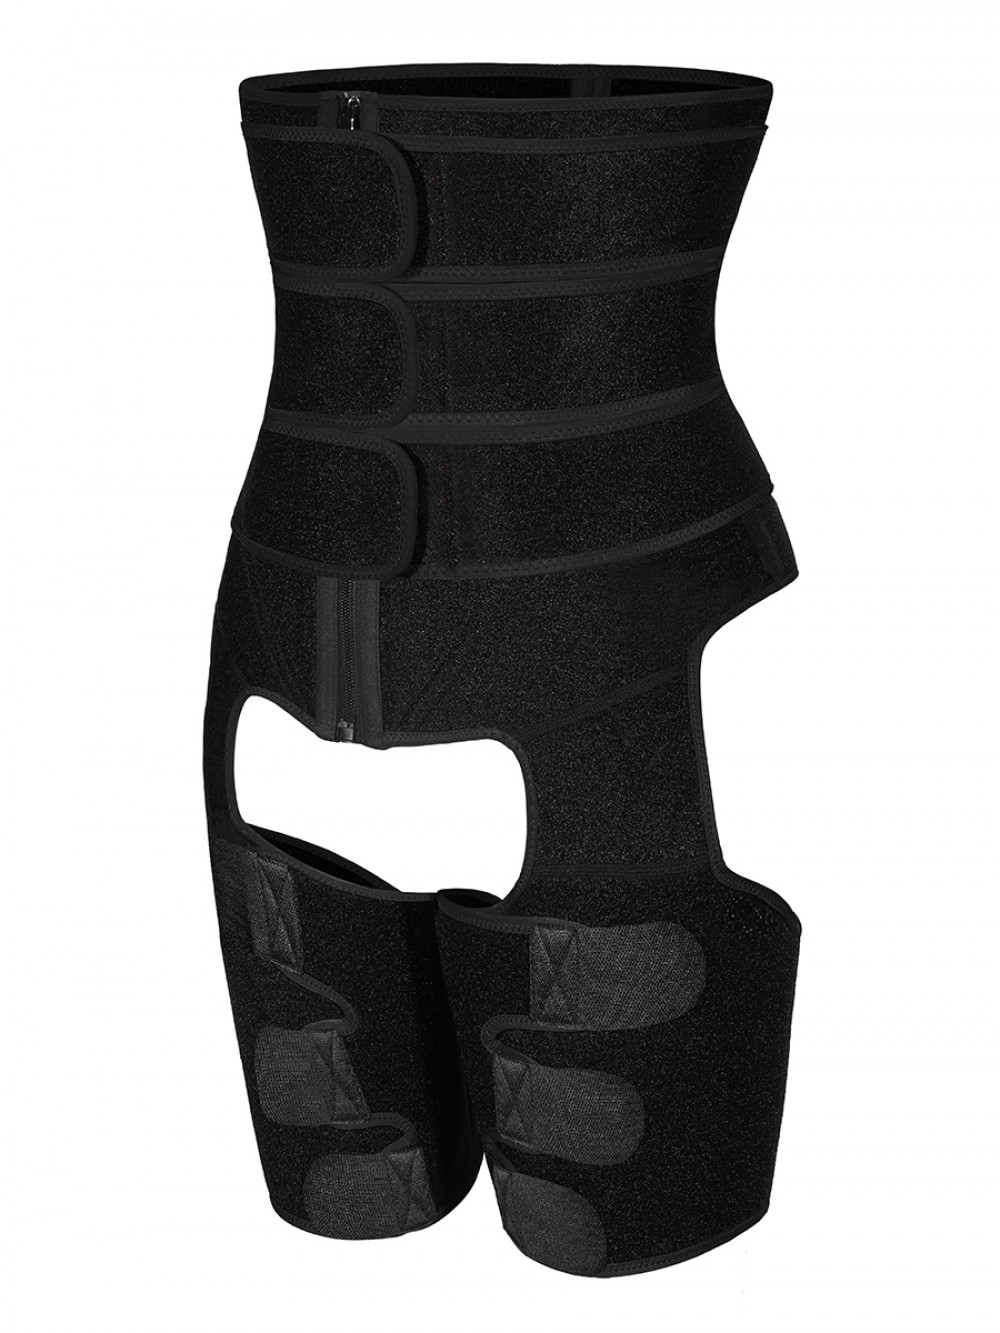 Black Tummy And Thigh Shaper Neoprene 3 Belts Midsection Compression